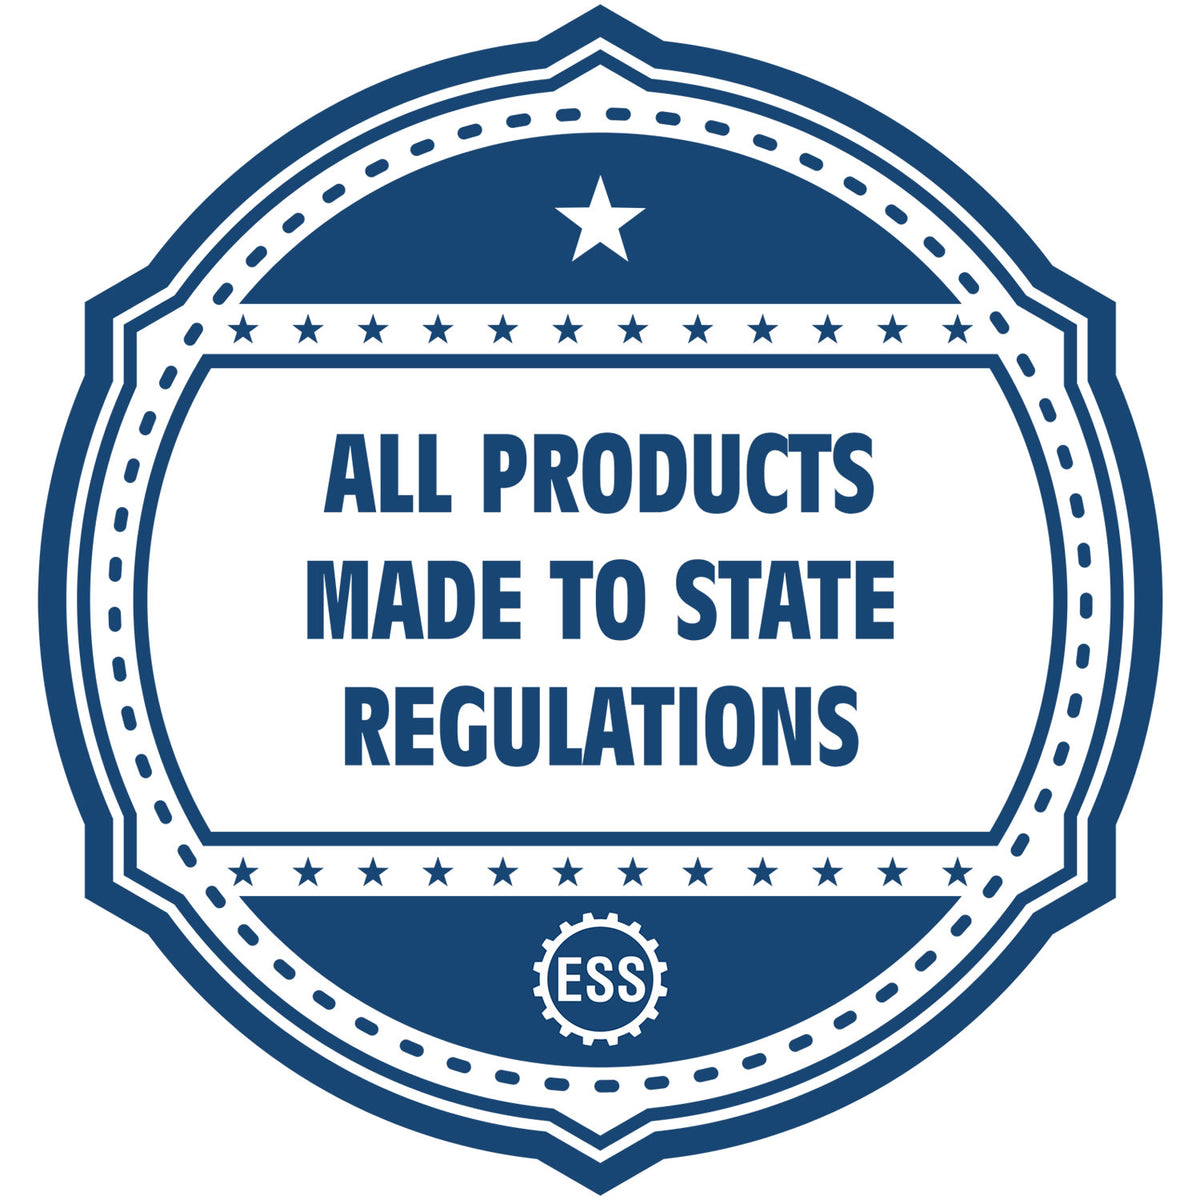 An icon or badge element for the Heavy Duty Cast Iron Montana Engineer Seal Embosser showing that this product is made in compliance with state regulations.